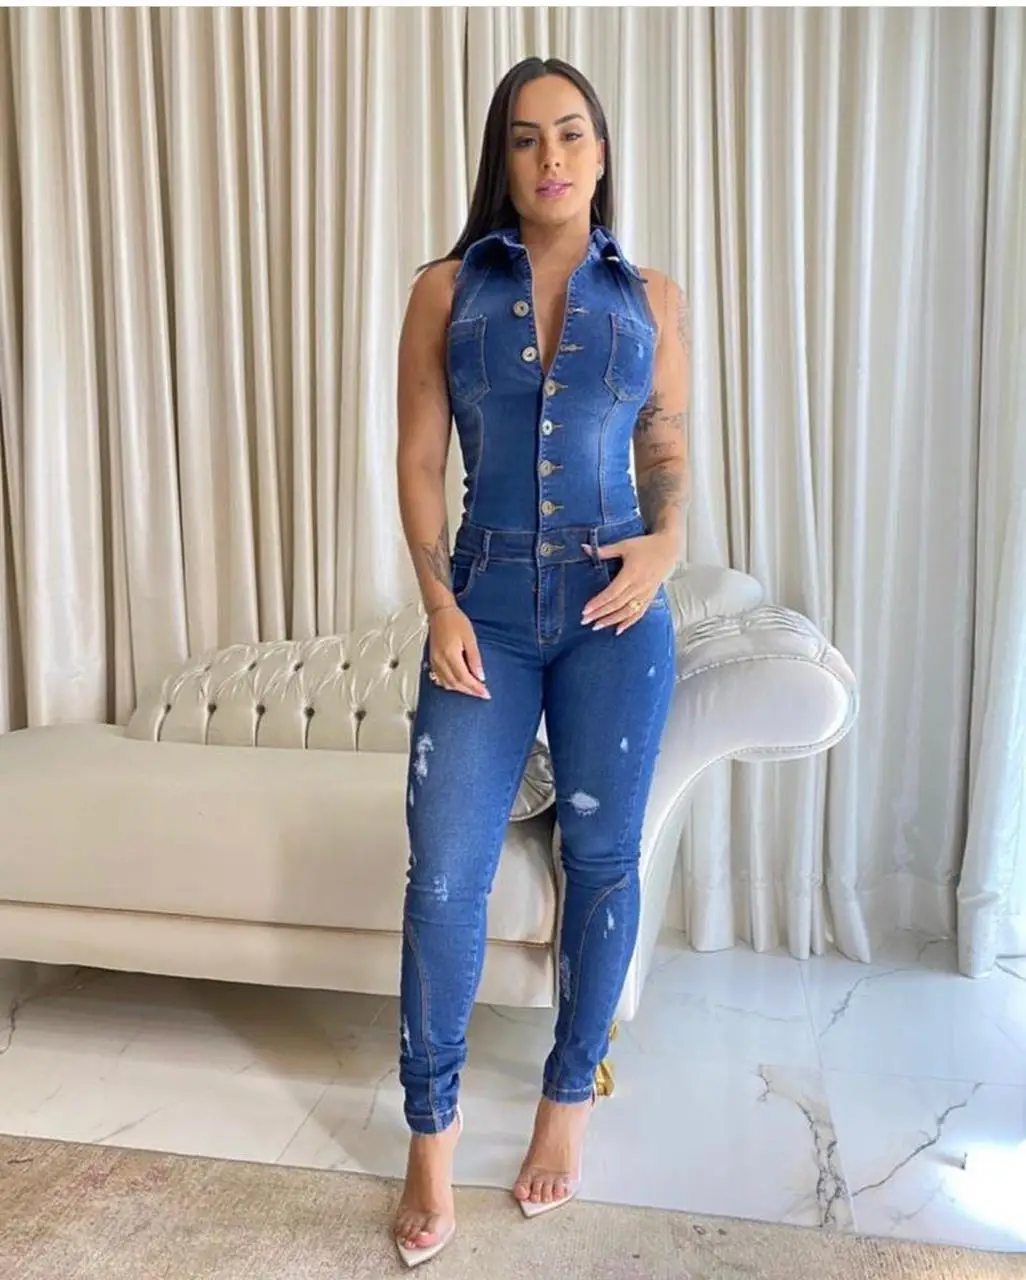 Jeans Stretch Overalls Sexy Women Turn Down Collar Elegant Blue Denim  Casual Jumpsuit Rompers - AliExpress